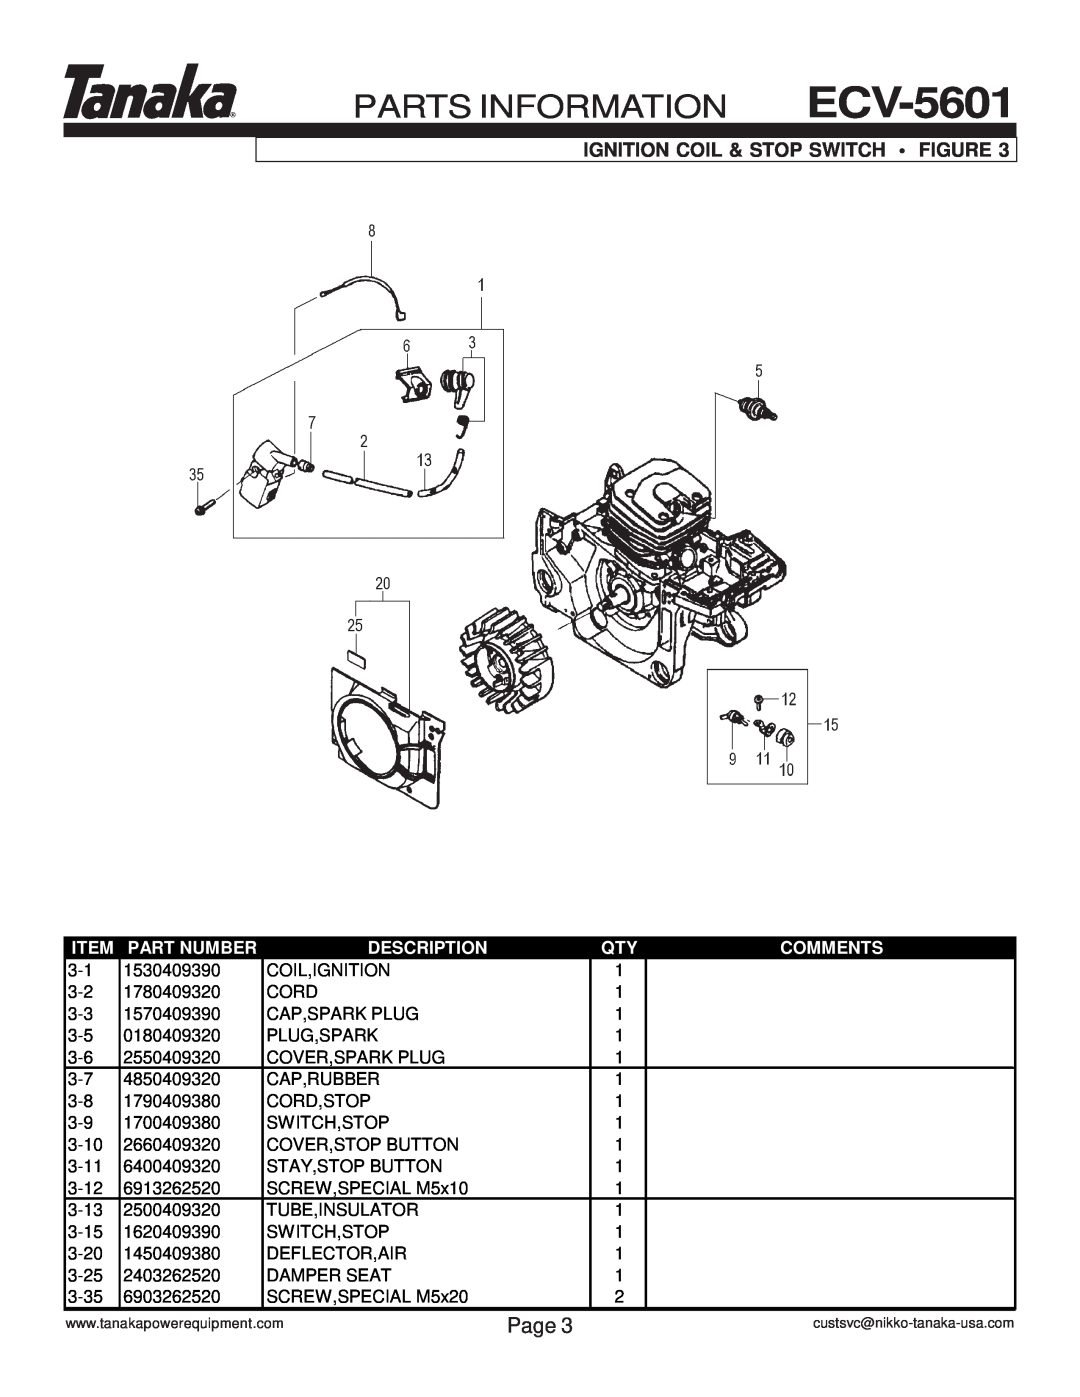 Tanaka manual Ignition Coil & Stop Switch Figure, PARTS INFORMATION ECV-5601, Page, Part Number, Description, Comments 